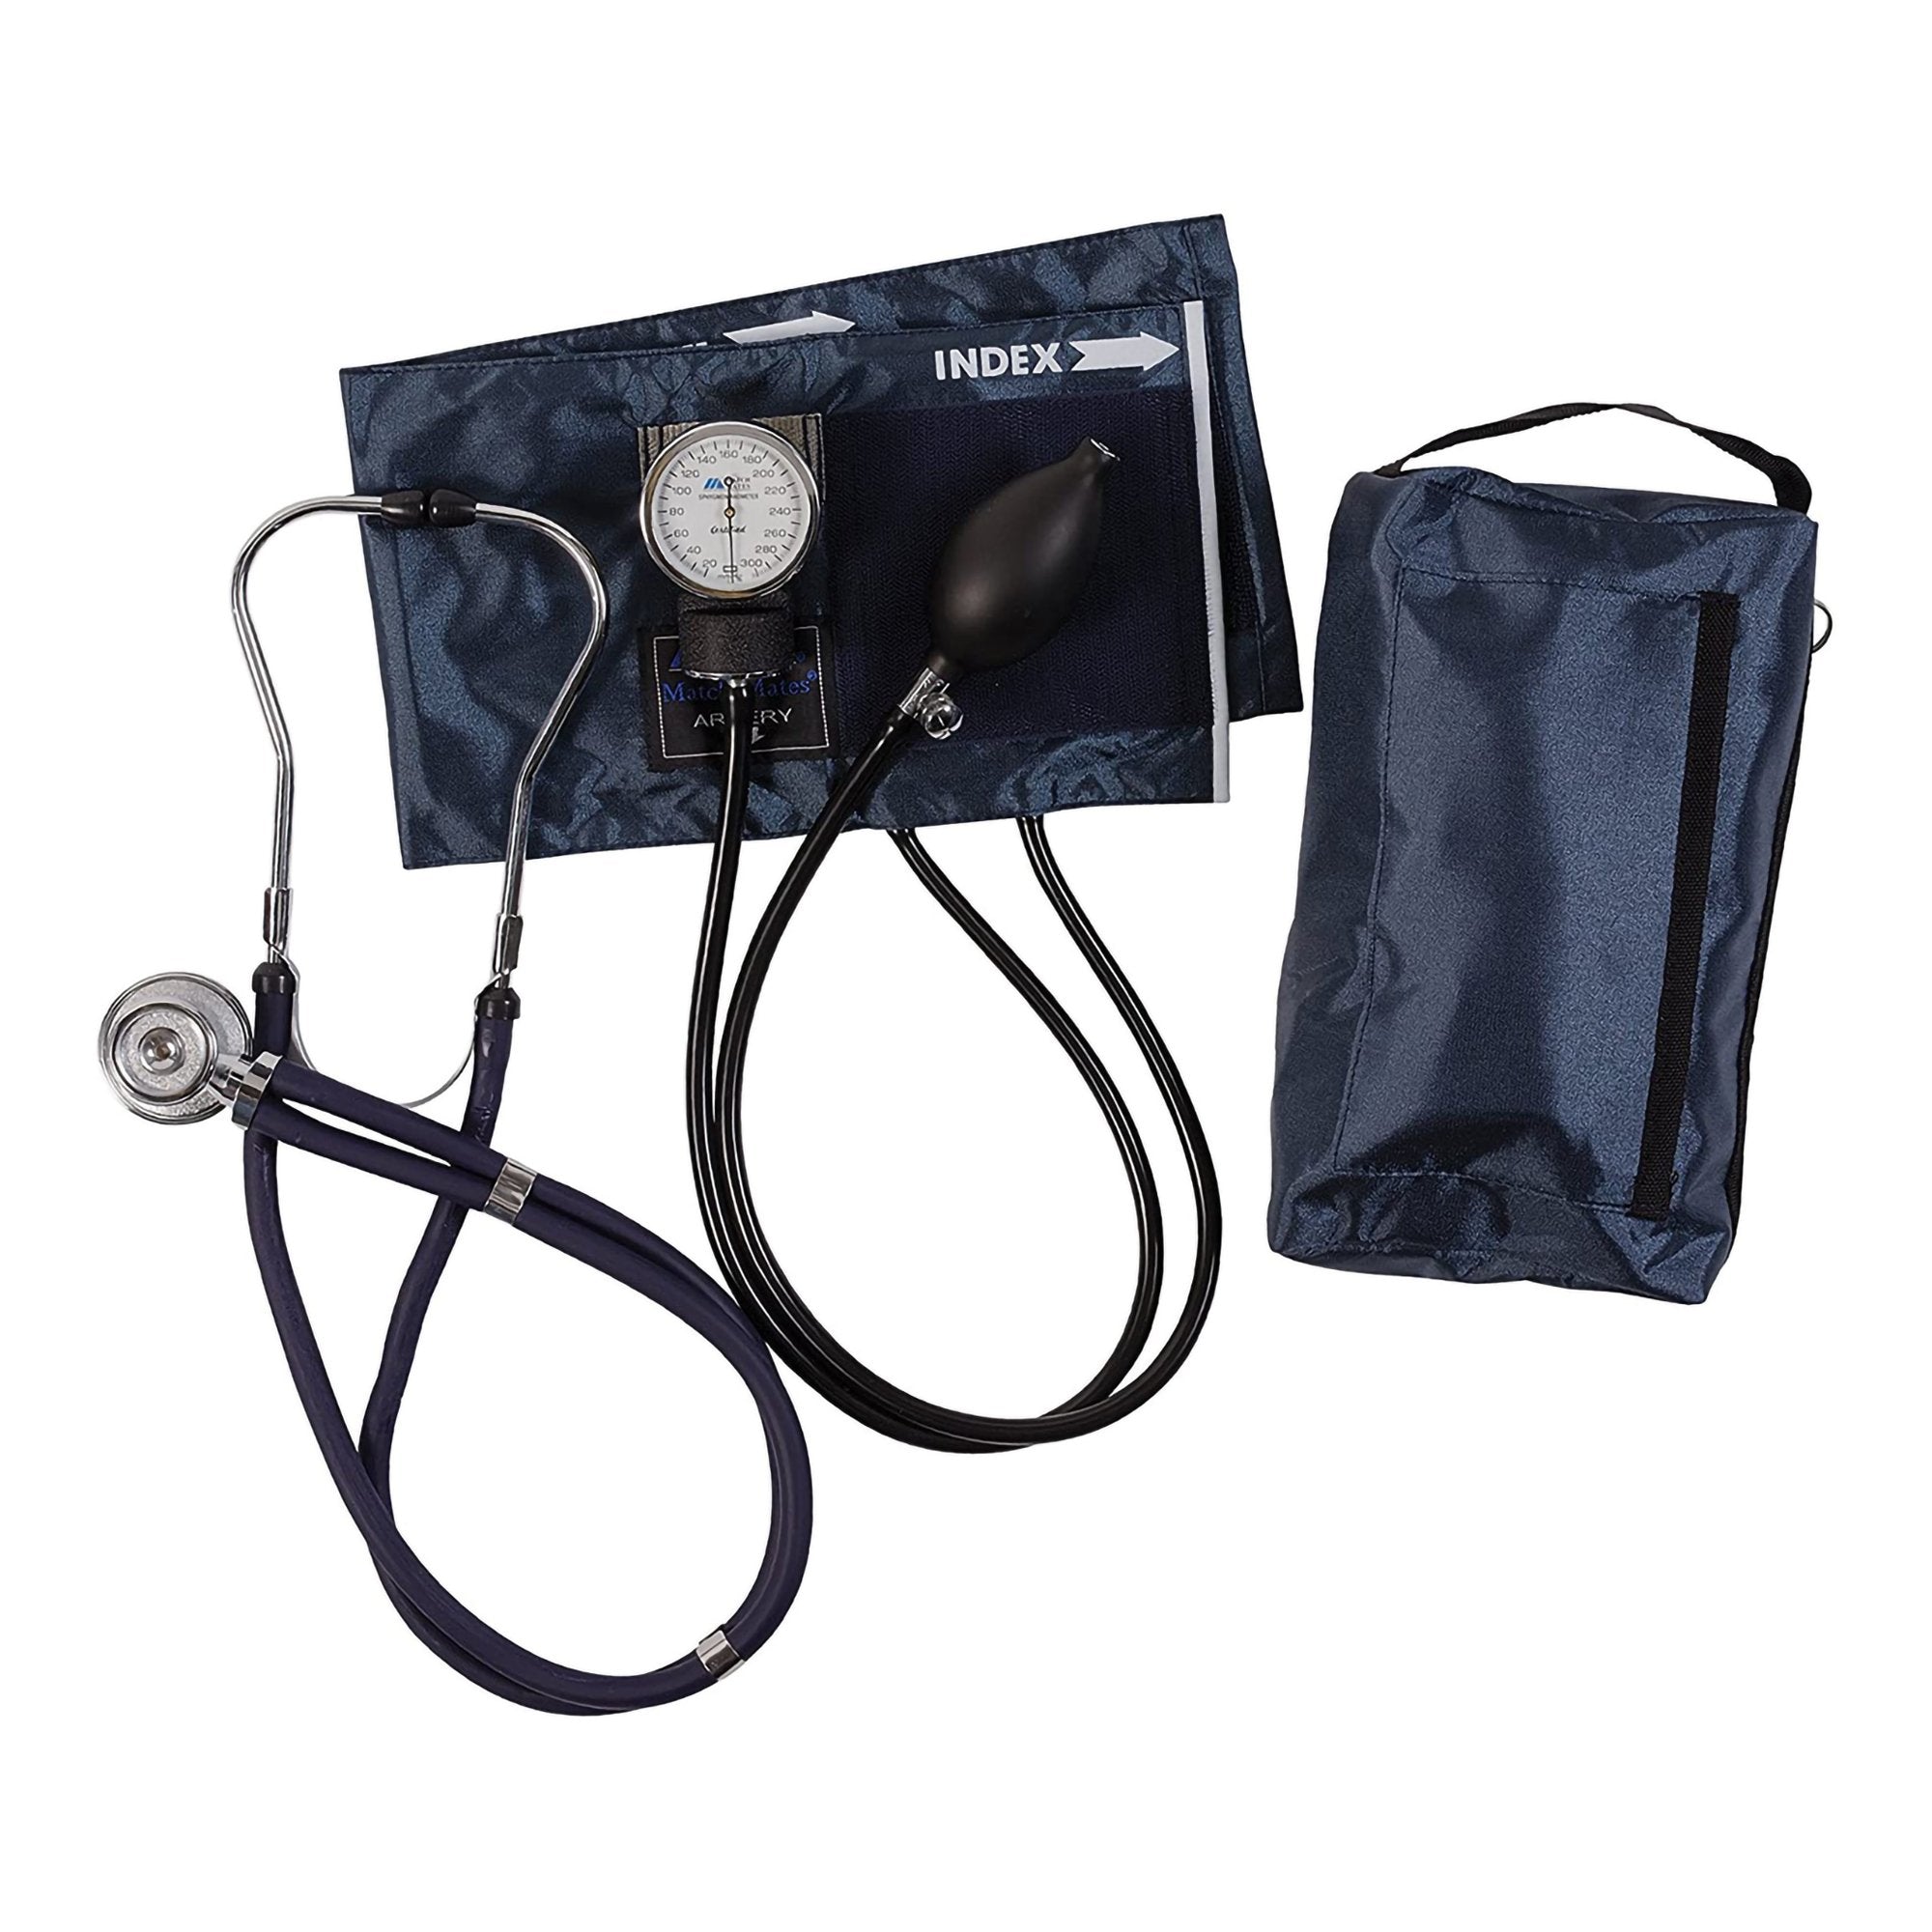 MABIS? MATCHMATES ANEROID SPHYGMOMANOMETER AND STETHOSCOPE BLOOD PRESSURE KIT, NAVY BLUE, SOLD AS 1/EACH MABIS 01-360-241